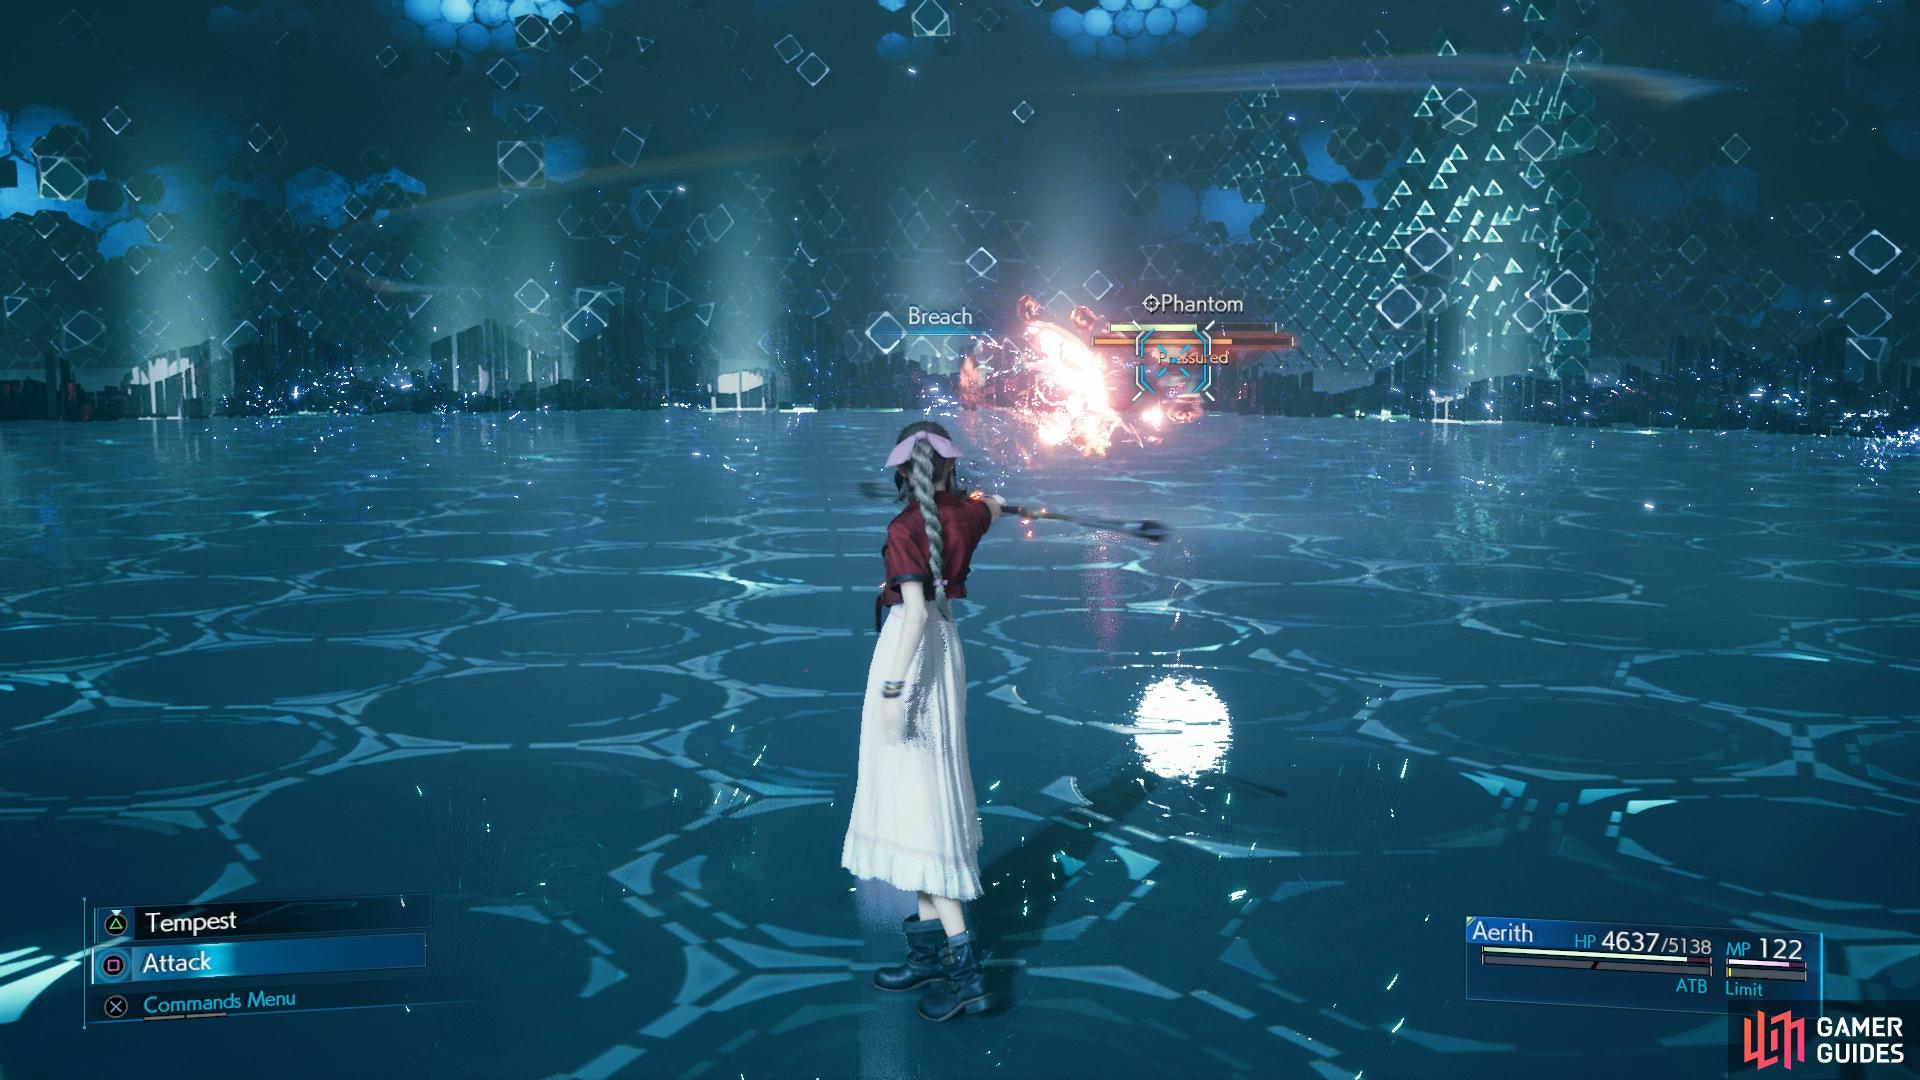 Aerith needs Subersion set at all costs or you'll be stuck when Phantom uses Reflect.